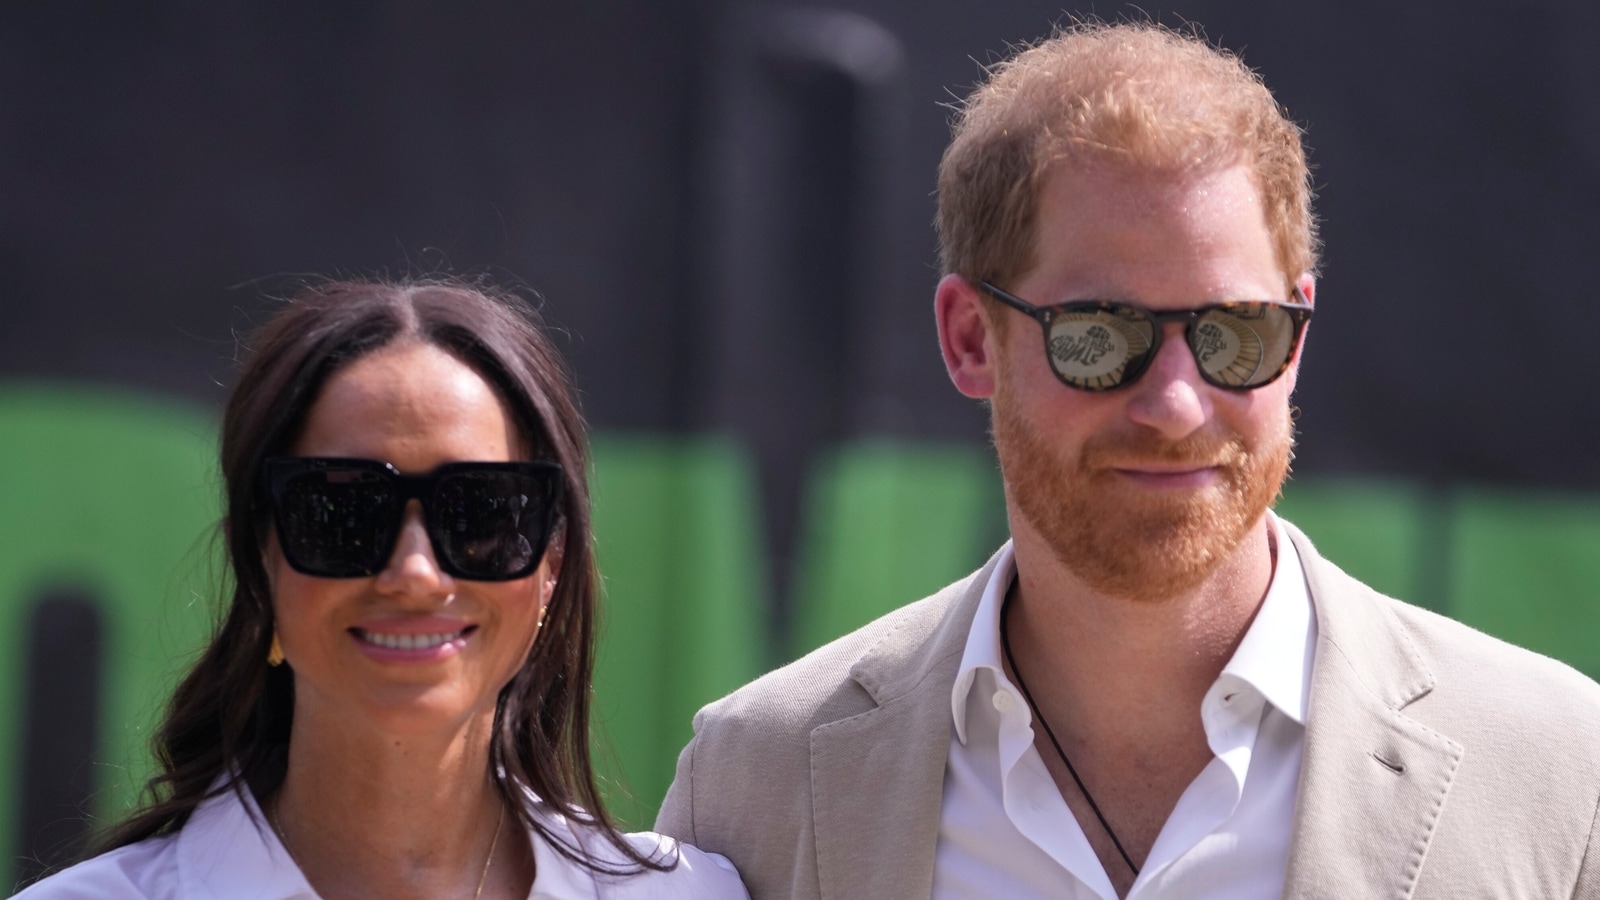 Royal commentator reveals why Meghan Markle chose to cut ties with UK